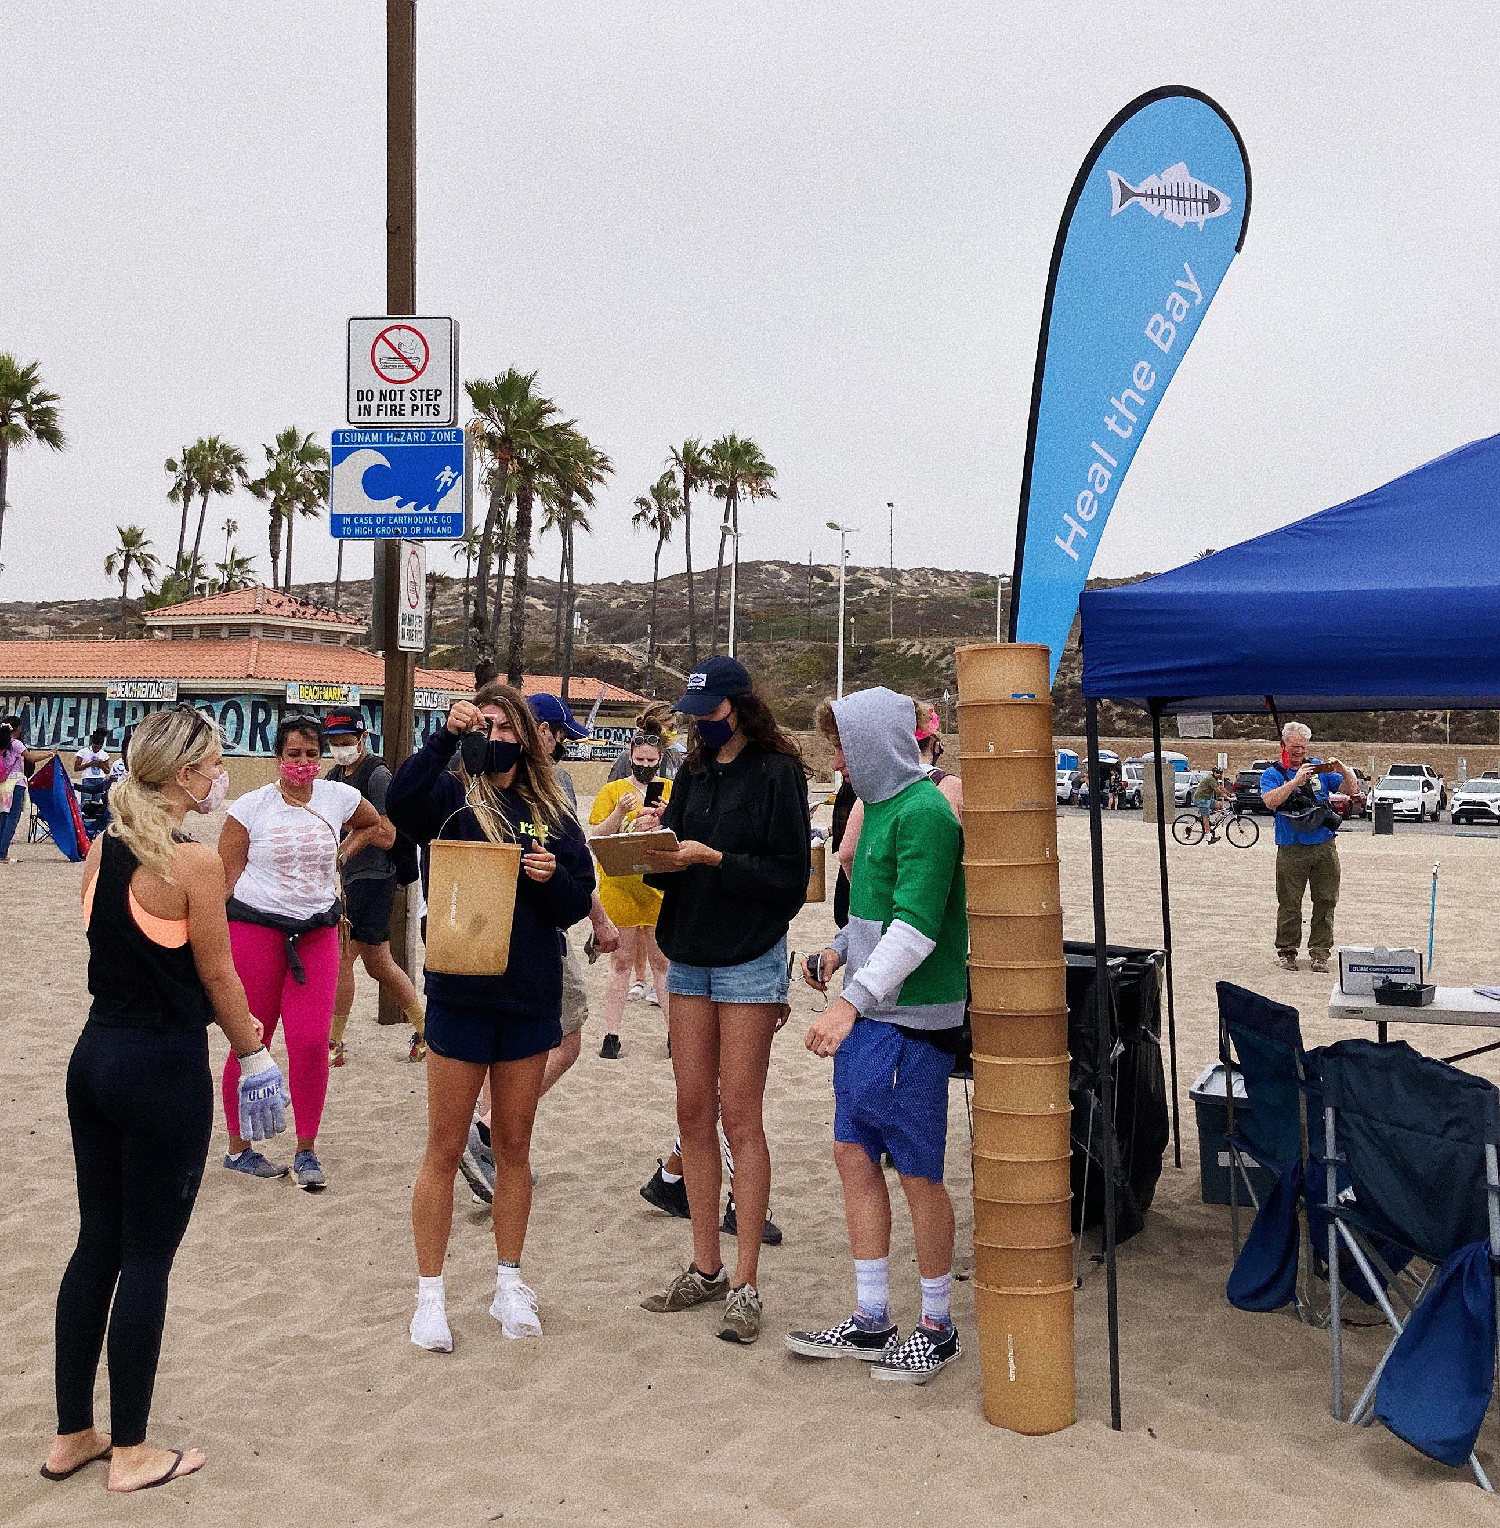 In July, TechStyle Fashion Group employees and Heal the Bay partnered to clean-up Dockweiler Beach.